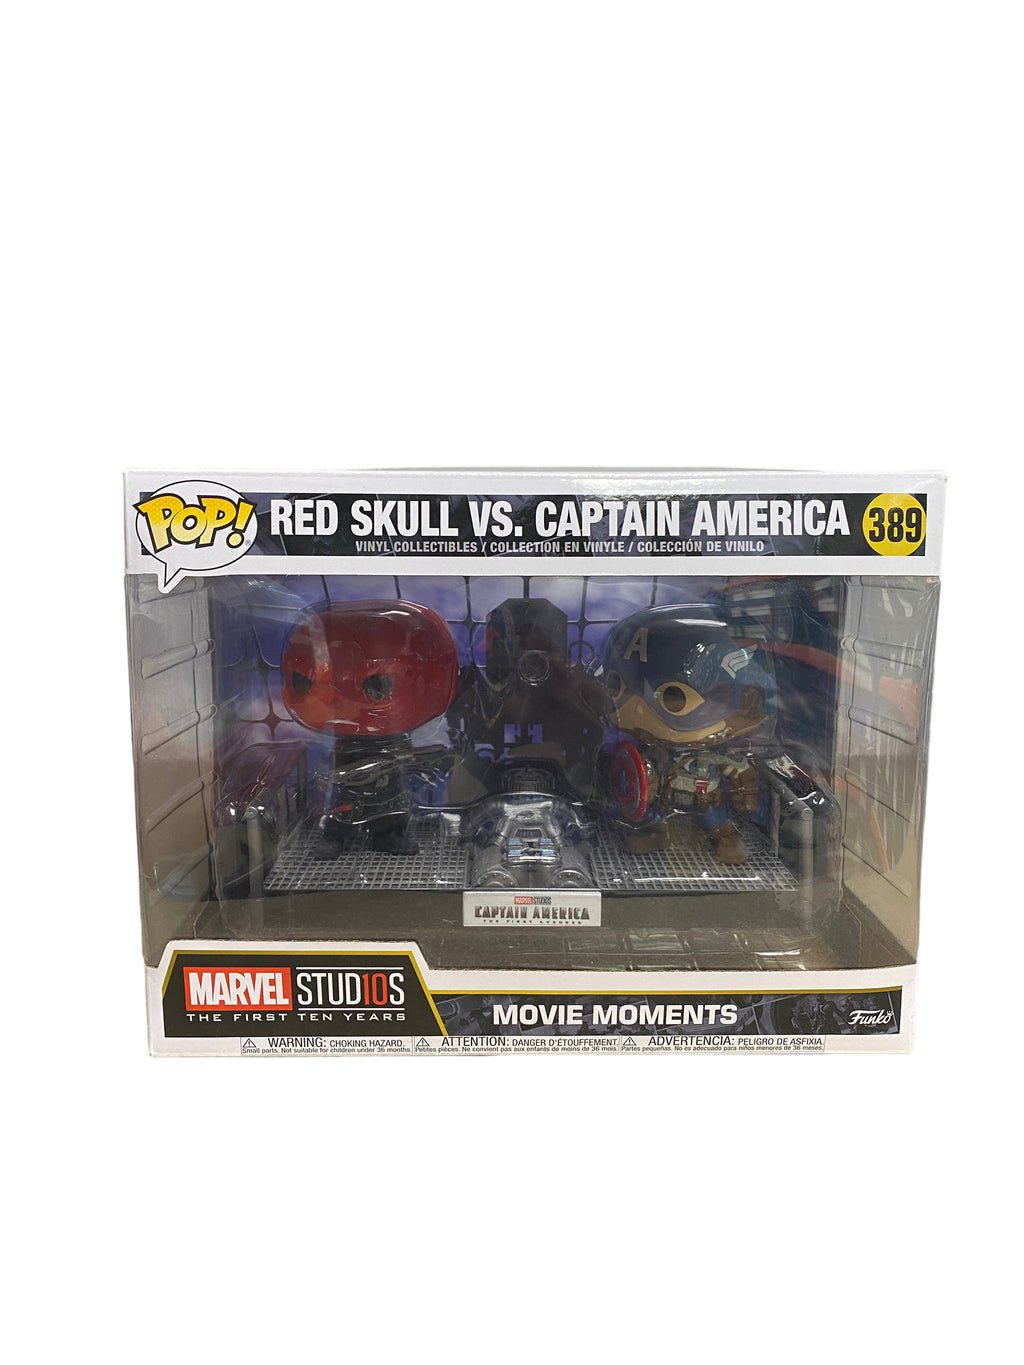 Red Skull Vs. Captain America #389 Funko Pop Movie Moment! - Marvel Studios  The First 10 Years - Condition 8/10